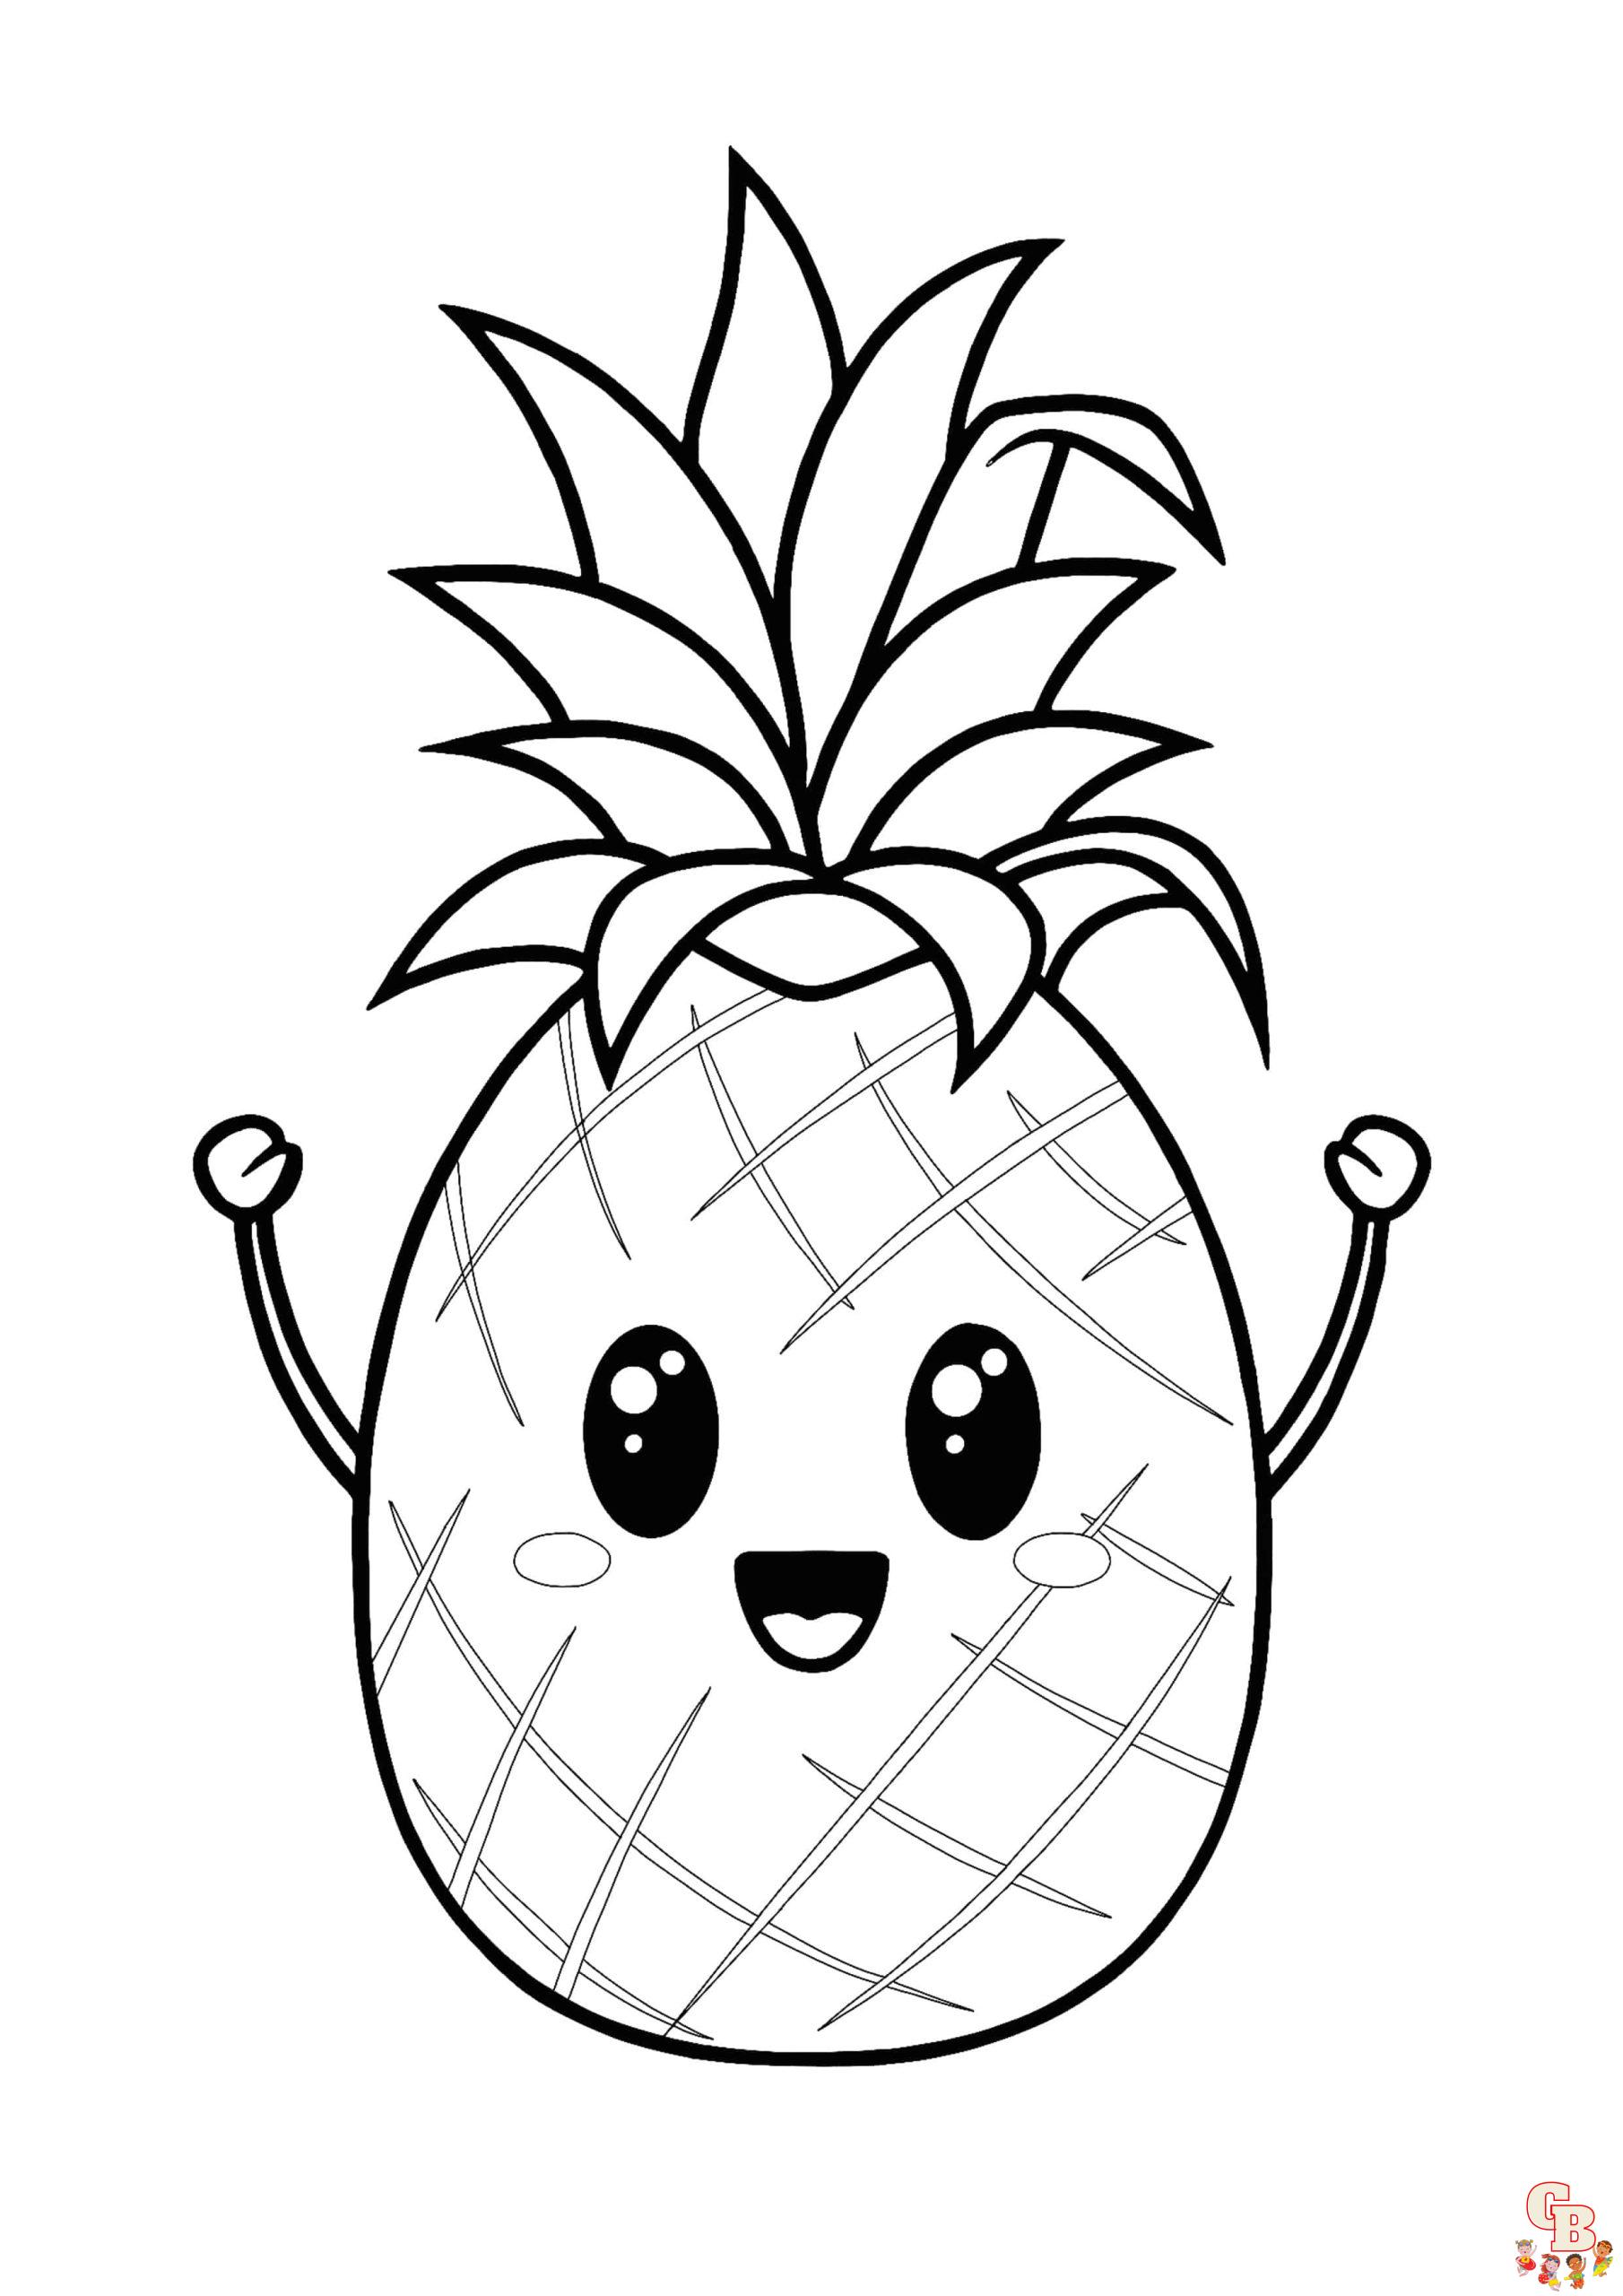 Pineapple coloring pages fun and free printable sheets for kids